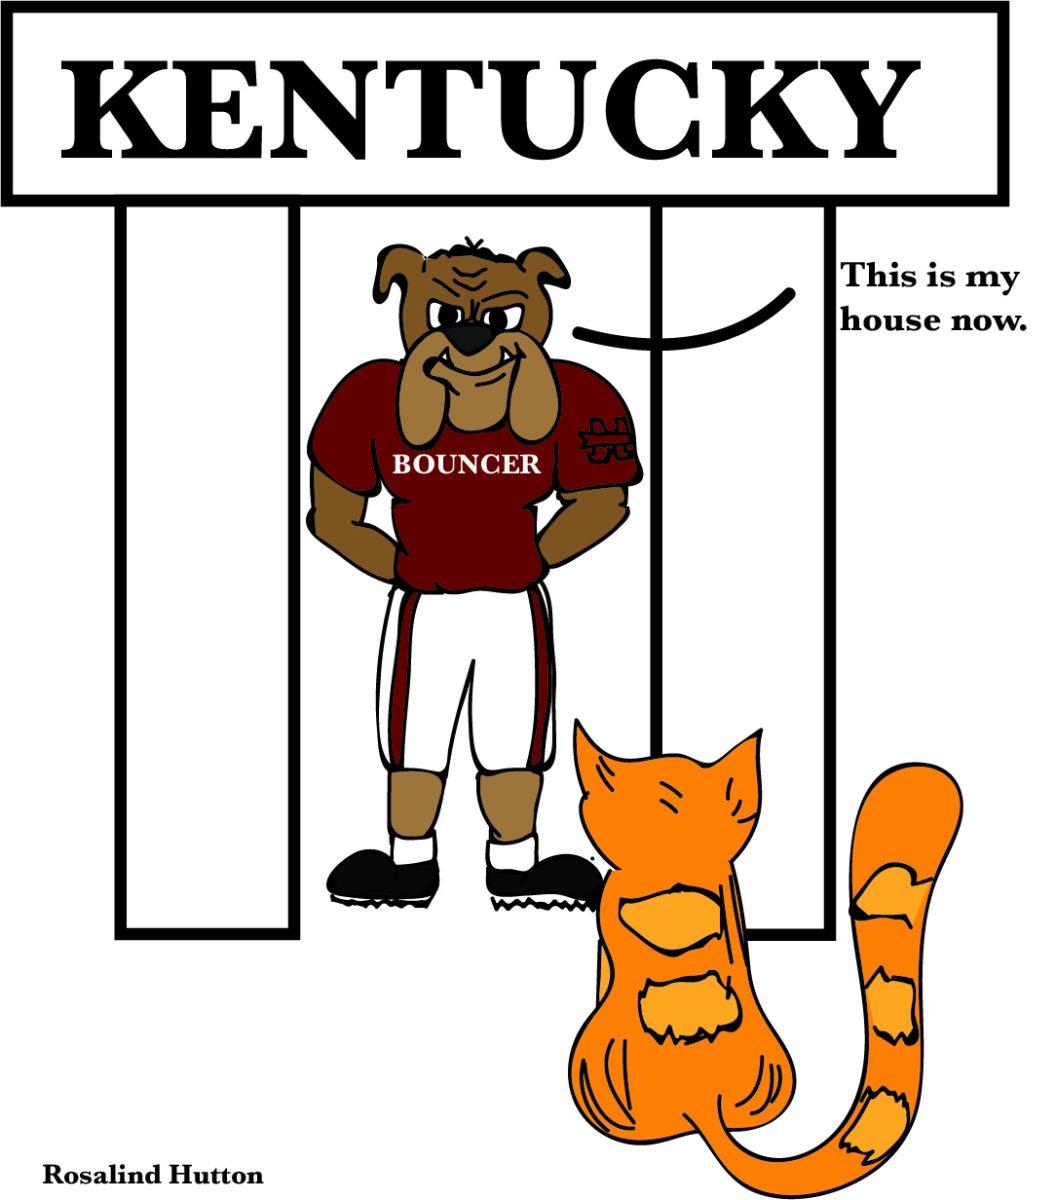 MSU+looks+to+block+Kentucky+on+road+to+first+SEC+game